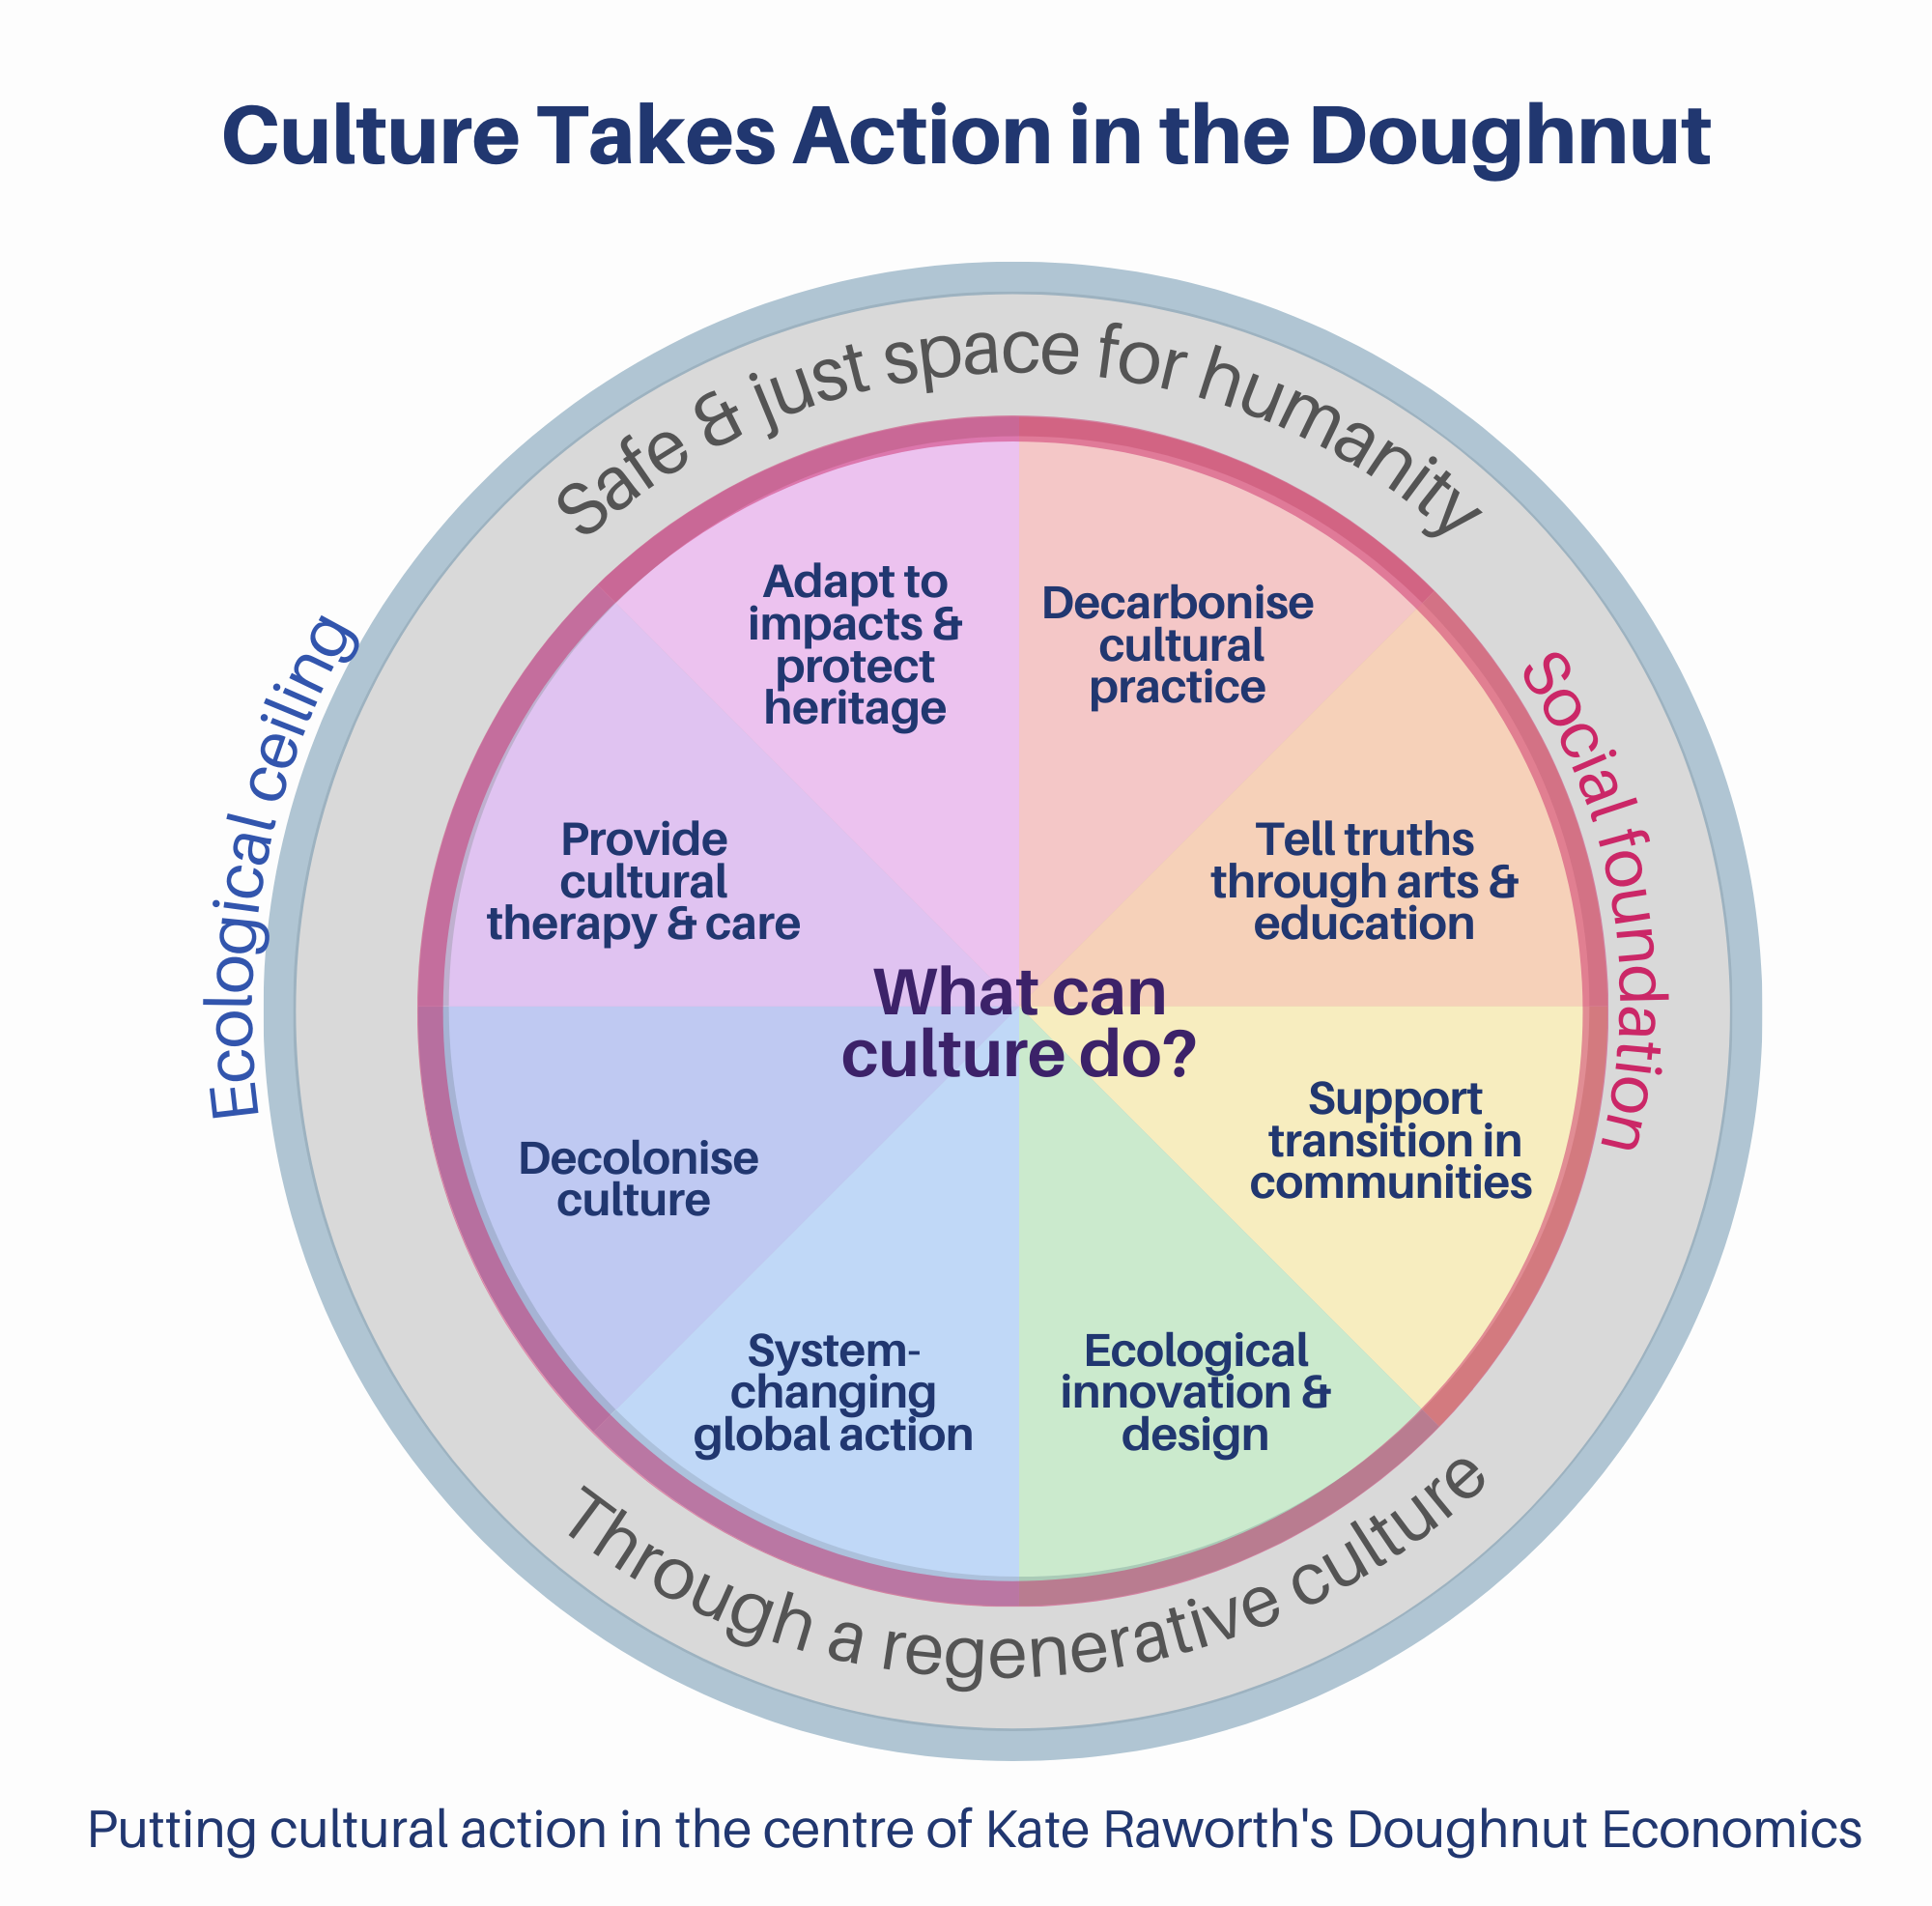 Culture Takes Action